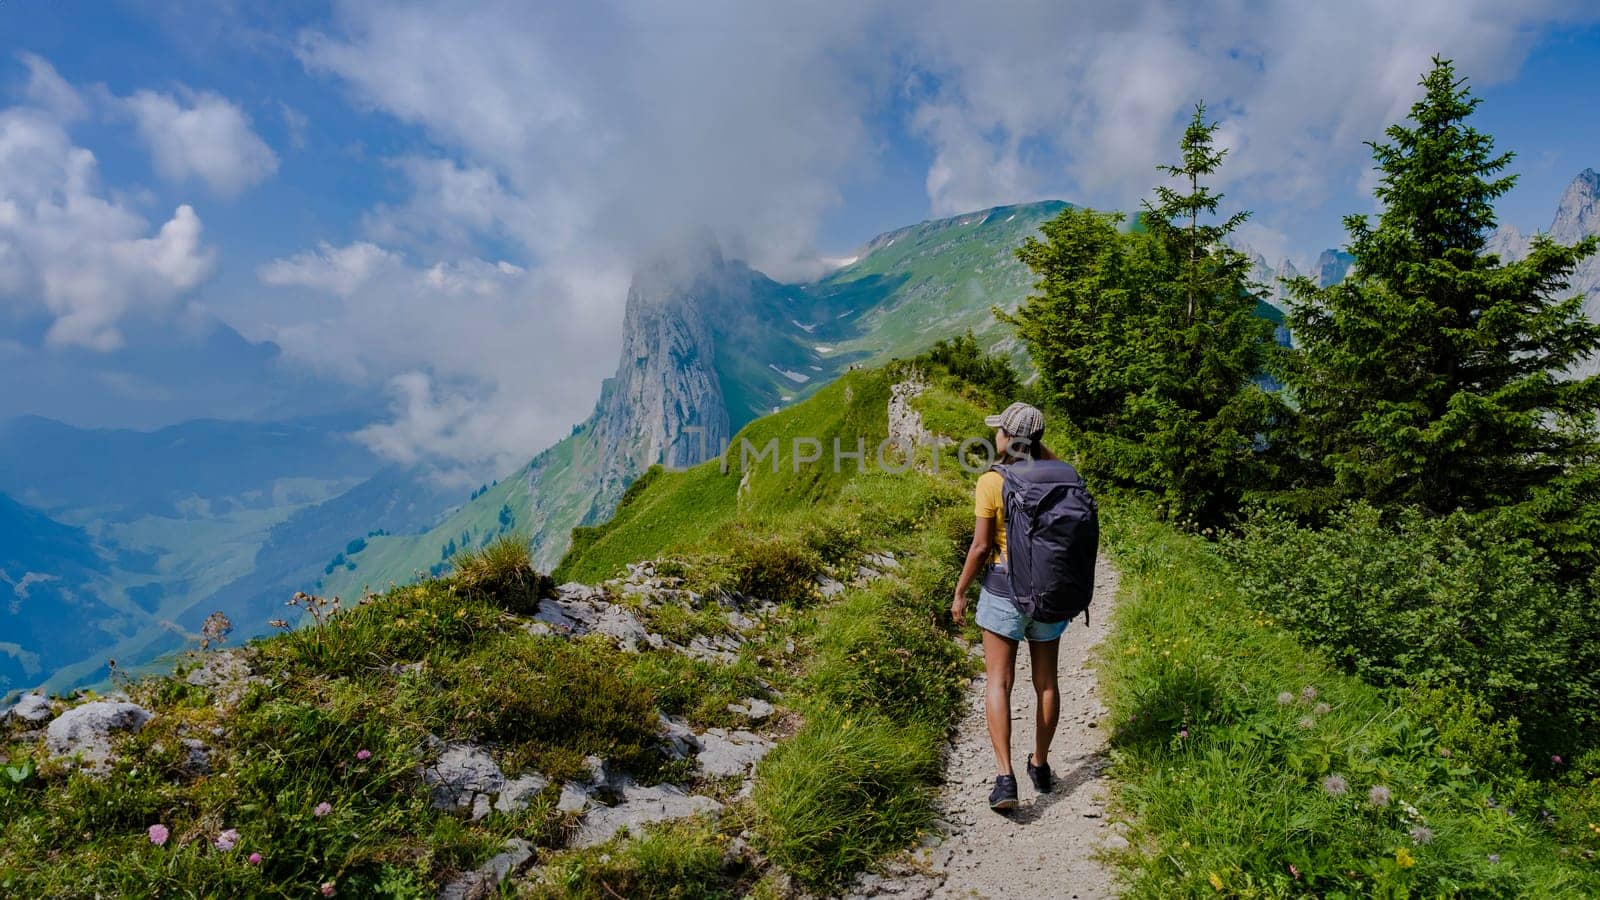 women hiking in the Swiss Alps mountains during summer vacation with a backpack and hiking boots. woman walking on the Saxer Lucke path in Switzerland during summer